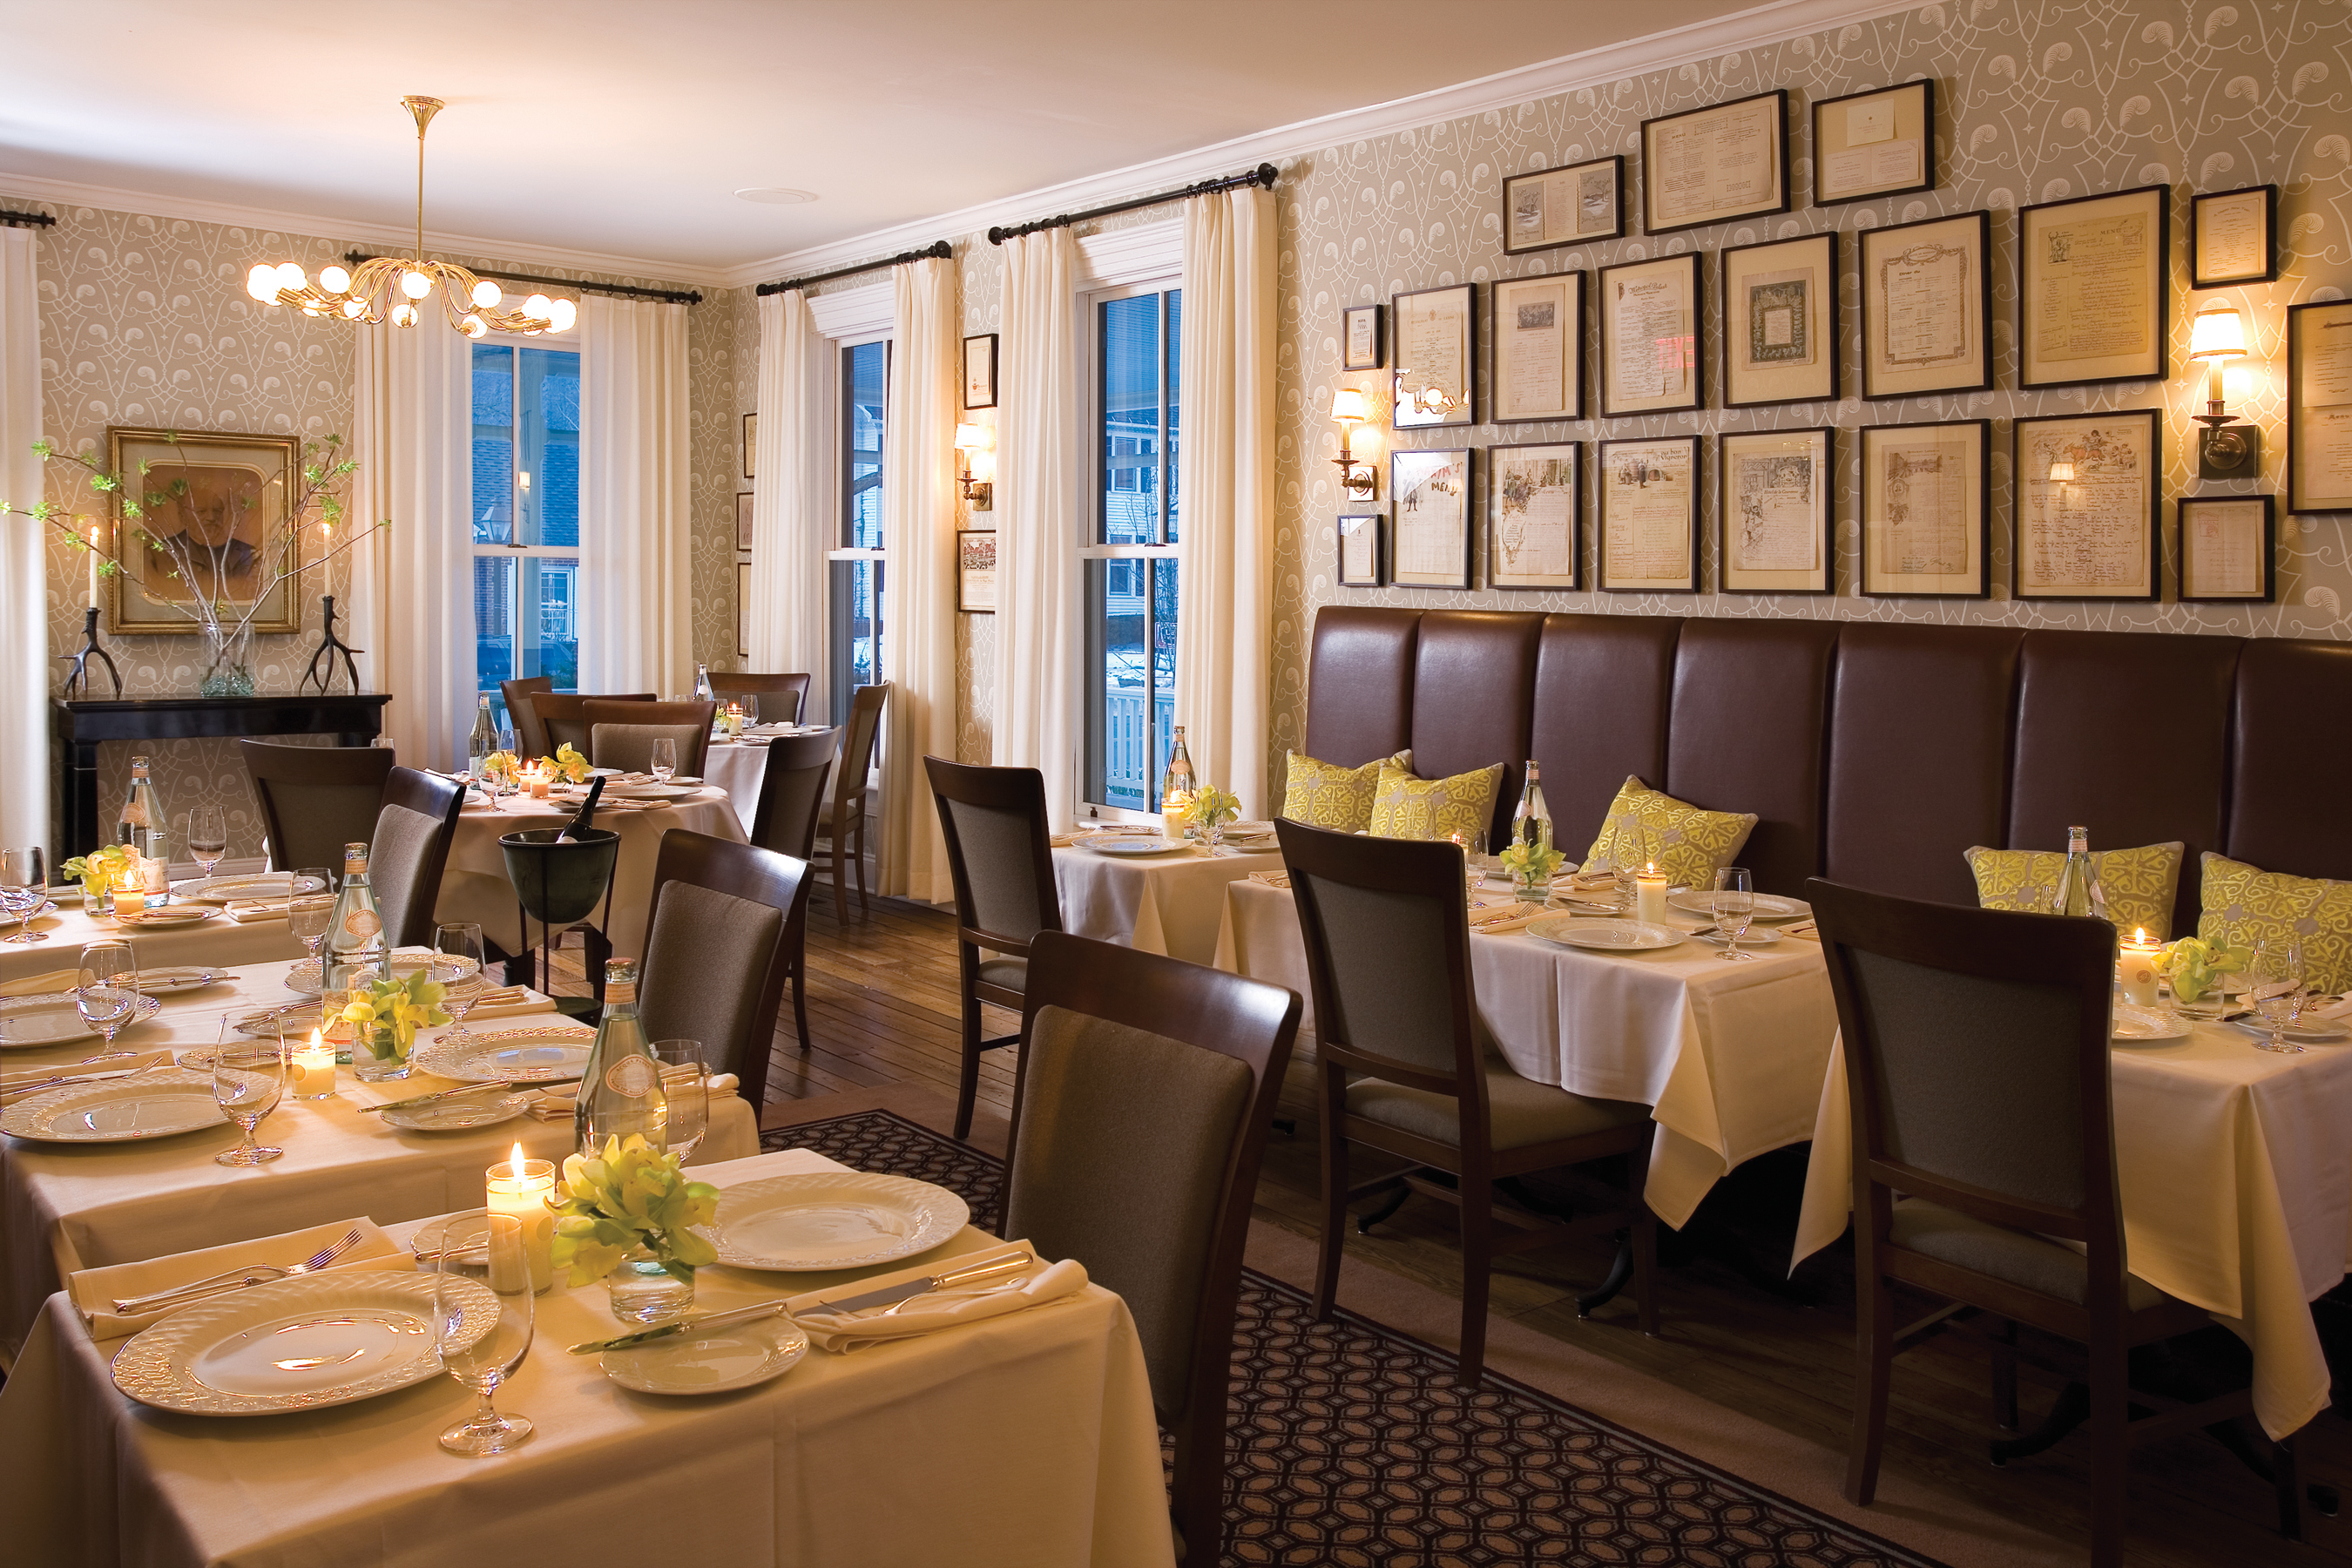 On-site dining available at The Delmonico Room, featuring fine regional American cuisine.